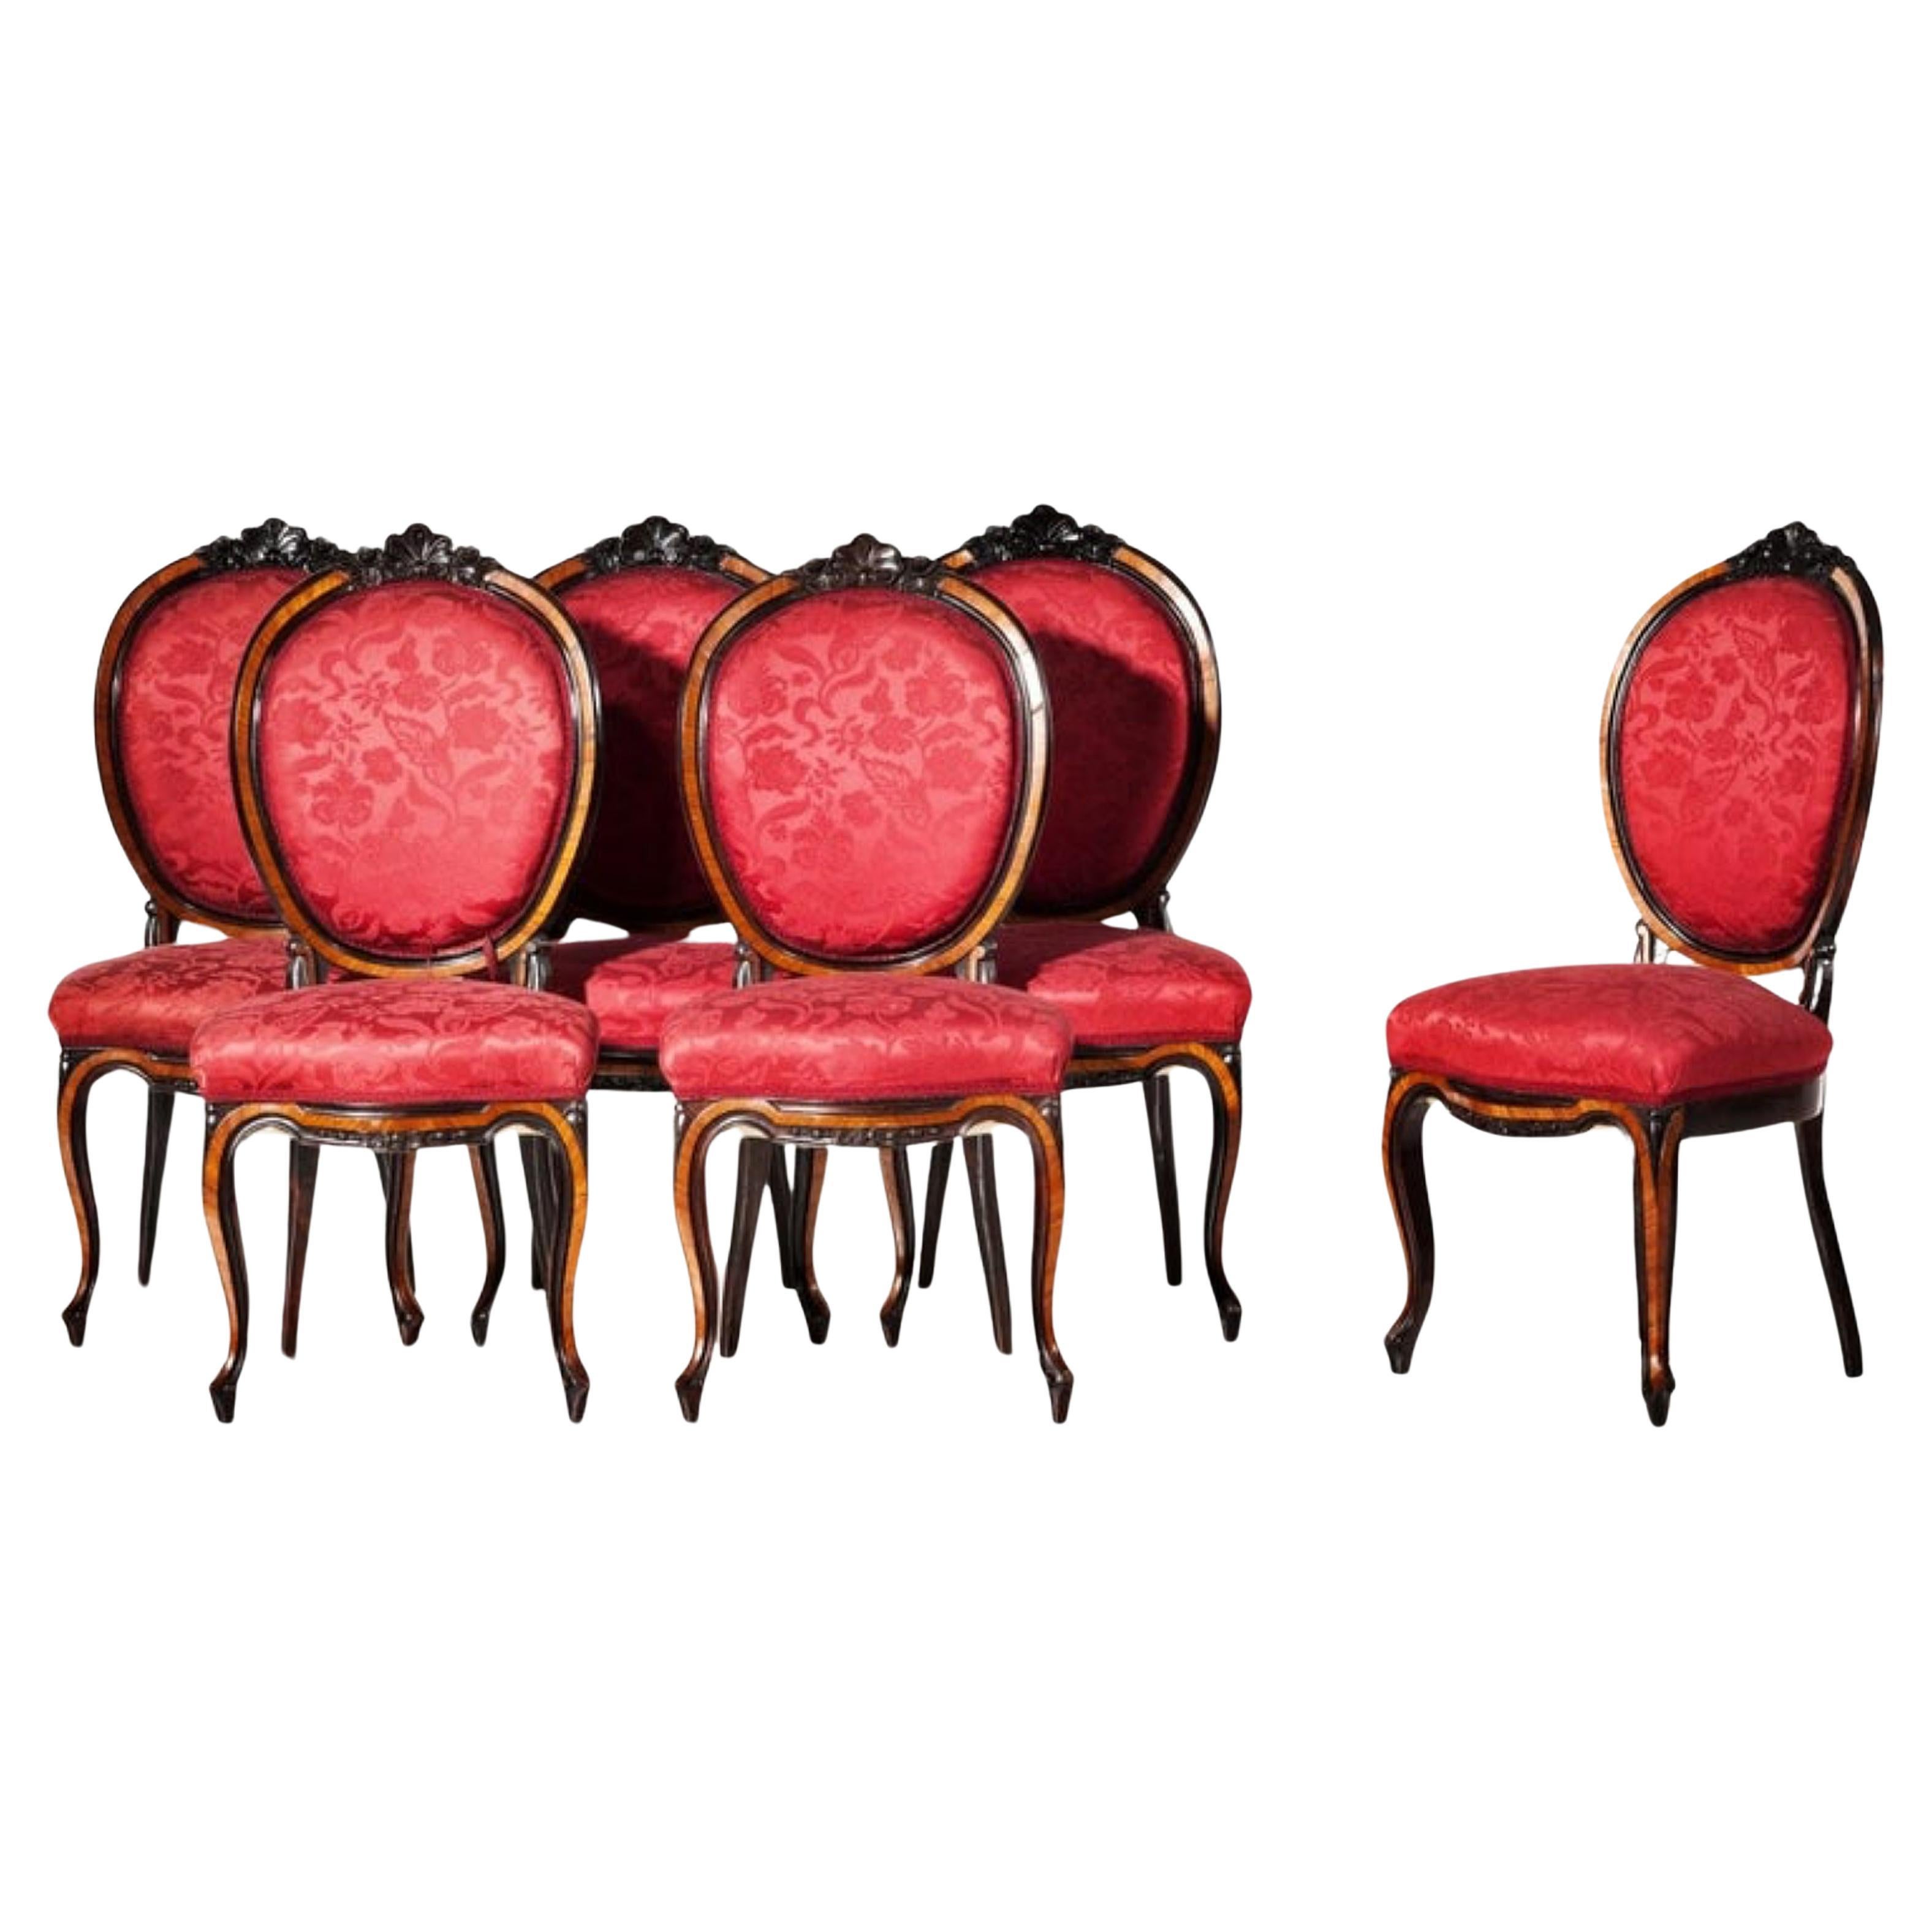 Six Portuguese Chairs of the 19th Century